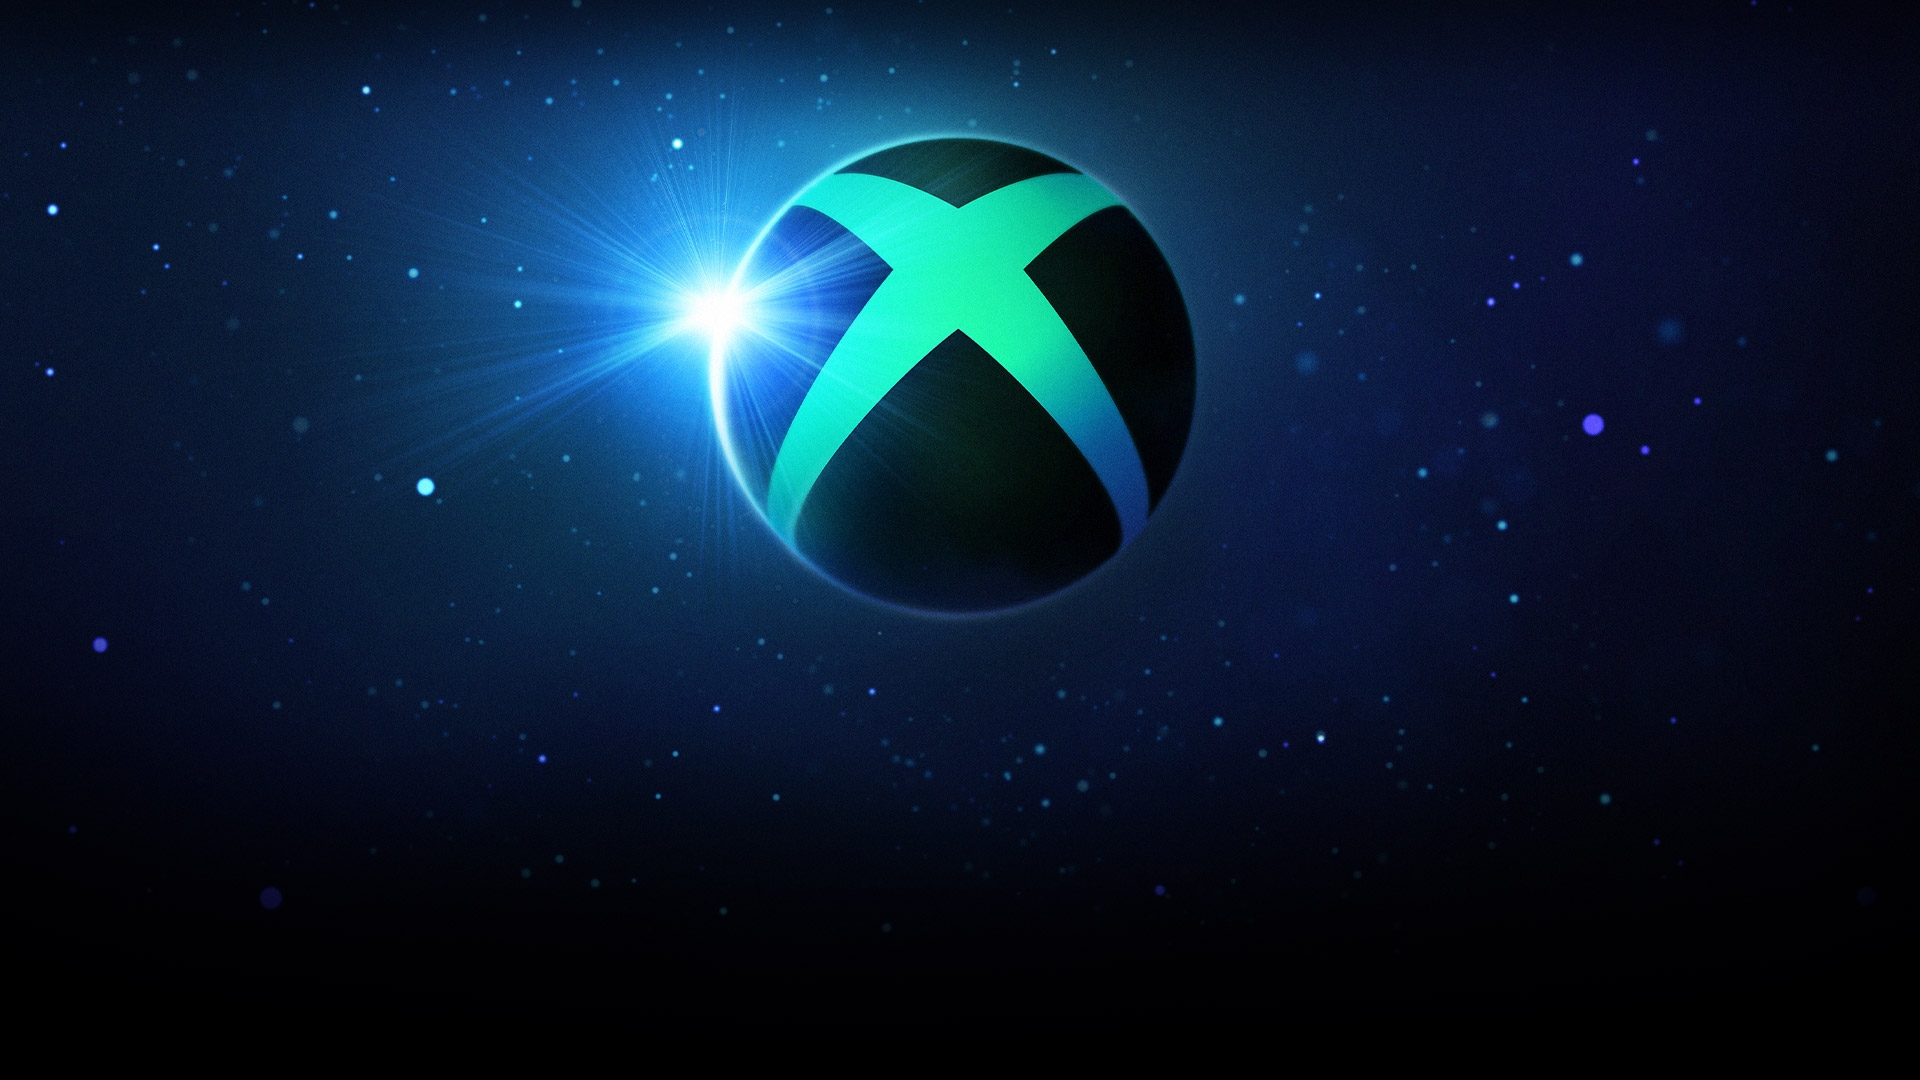 In this article, we are going to go over Bethesda Xbox games showcase 2022 all trailers, so you can see all of the upcoming games and updates.